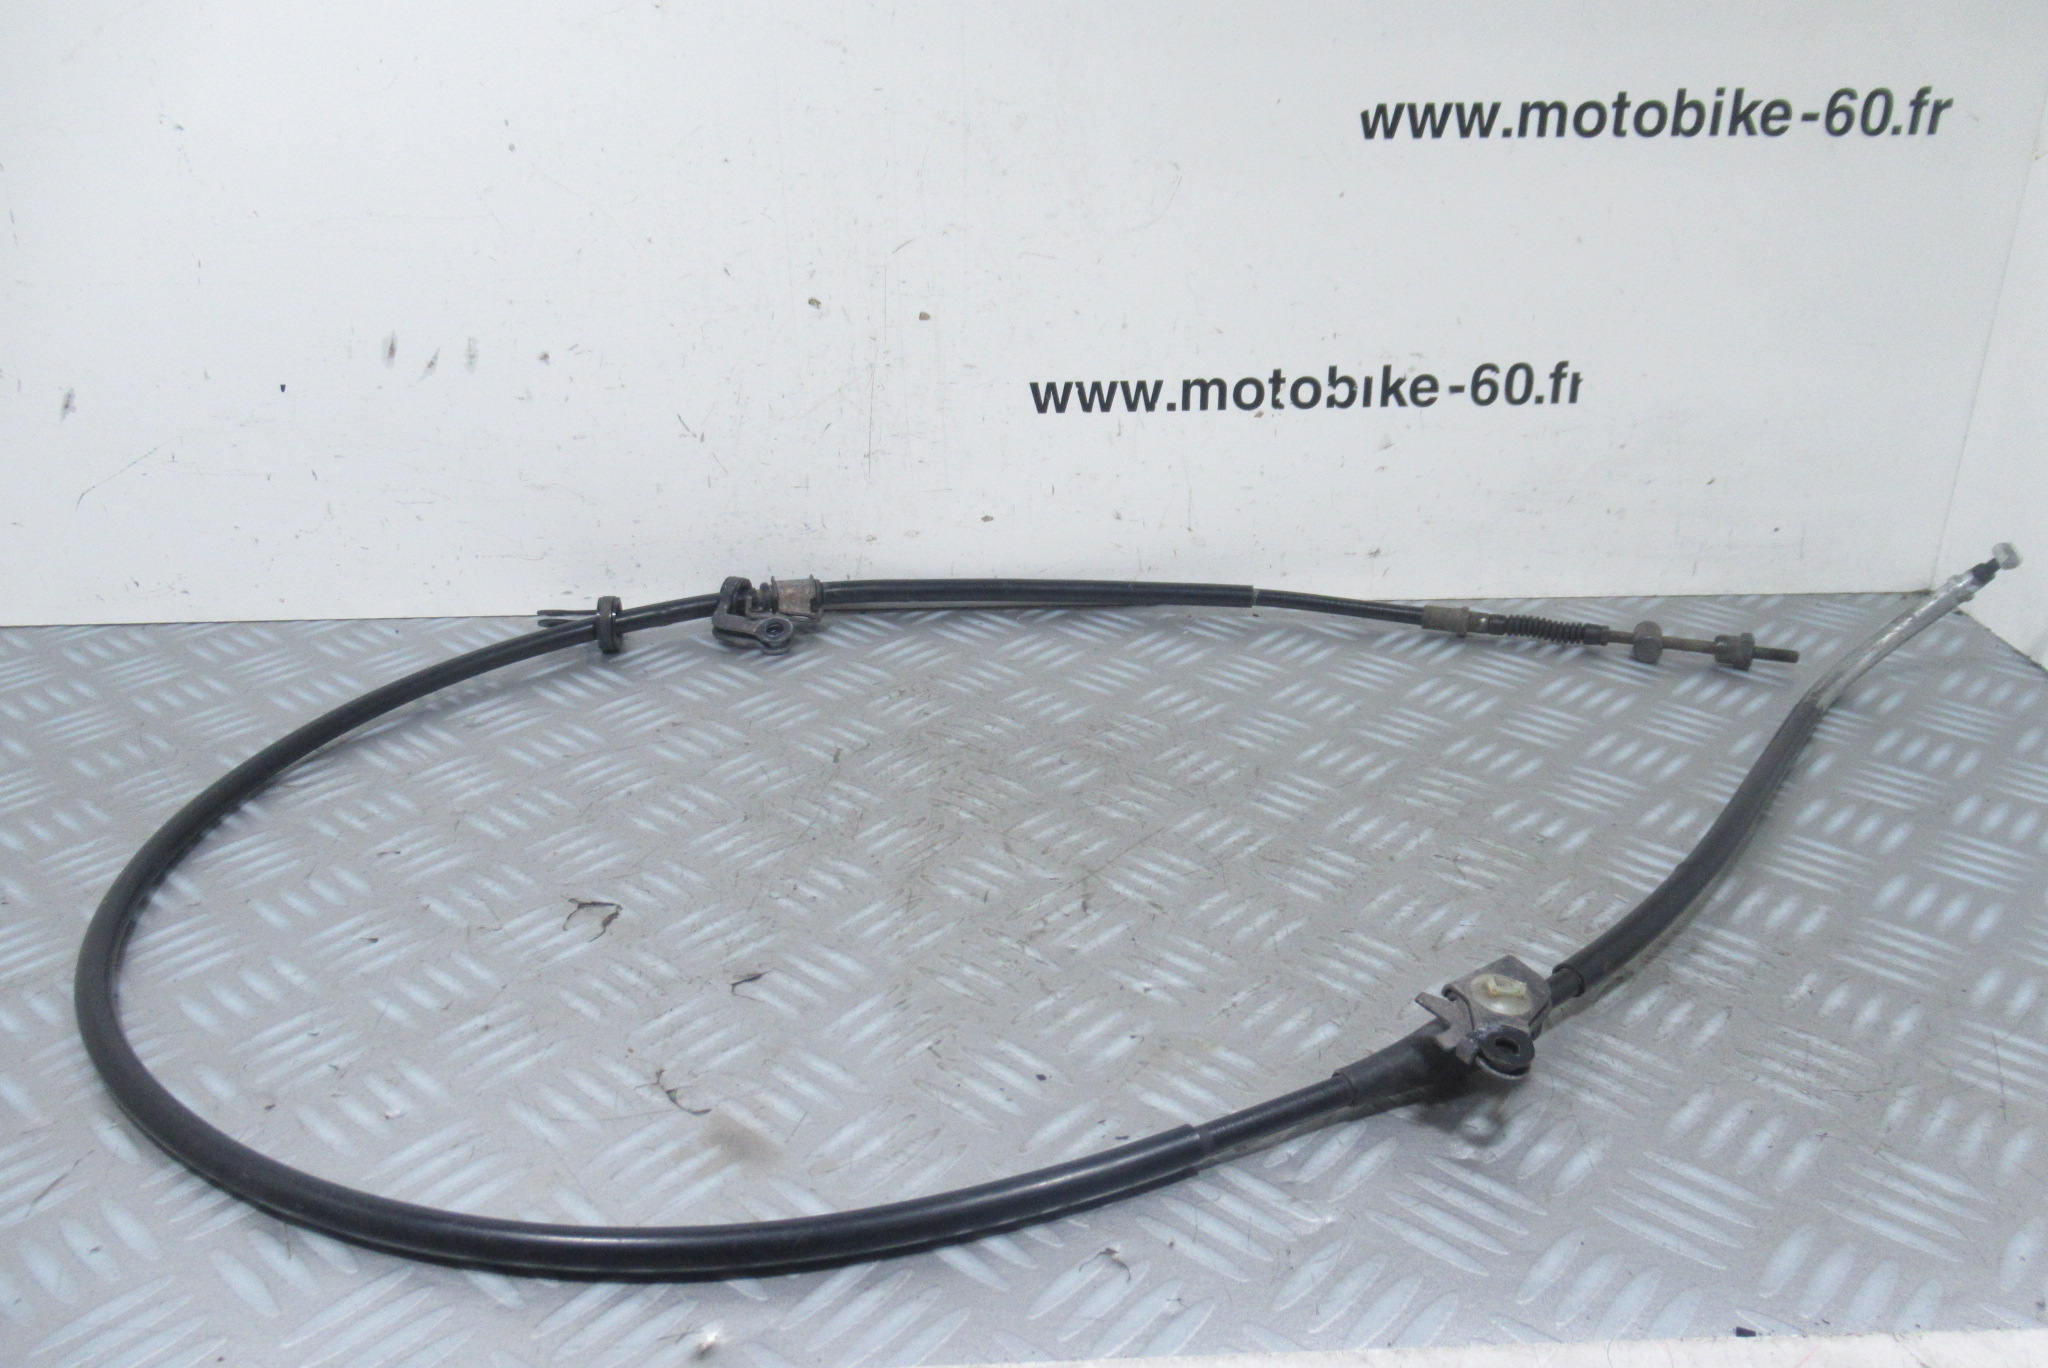 Cable frein arriere Honda PCX 125 4t Ph1/Ph2